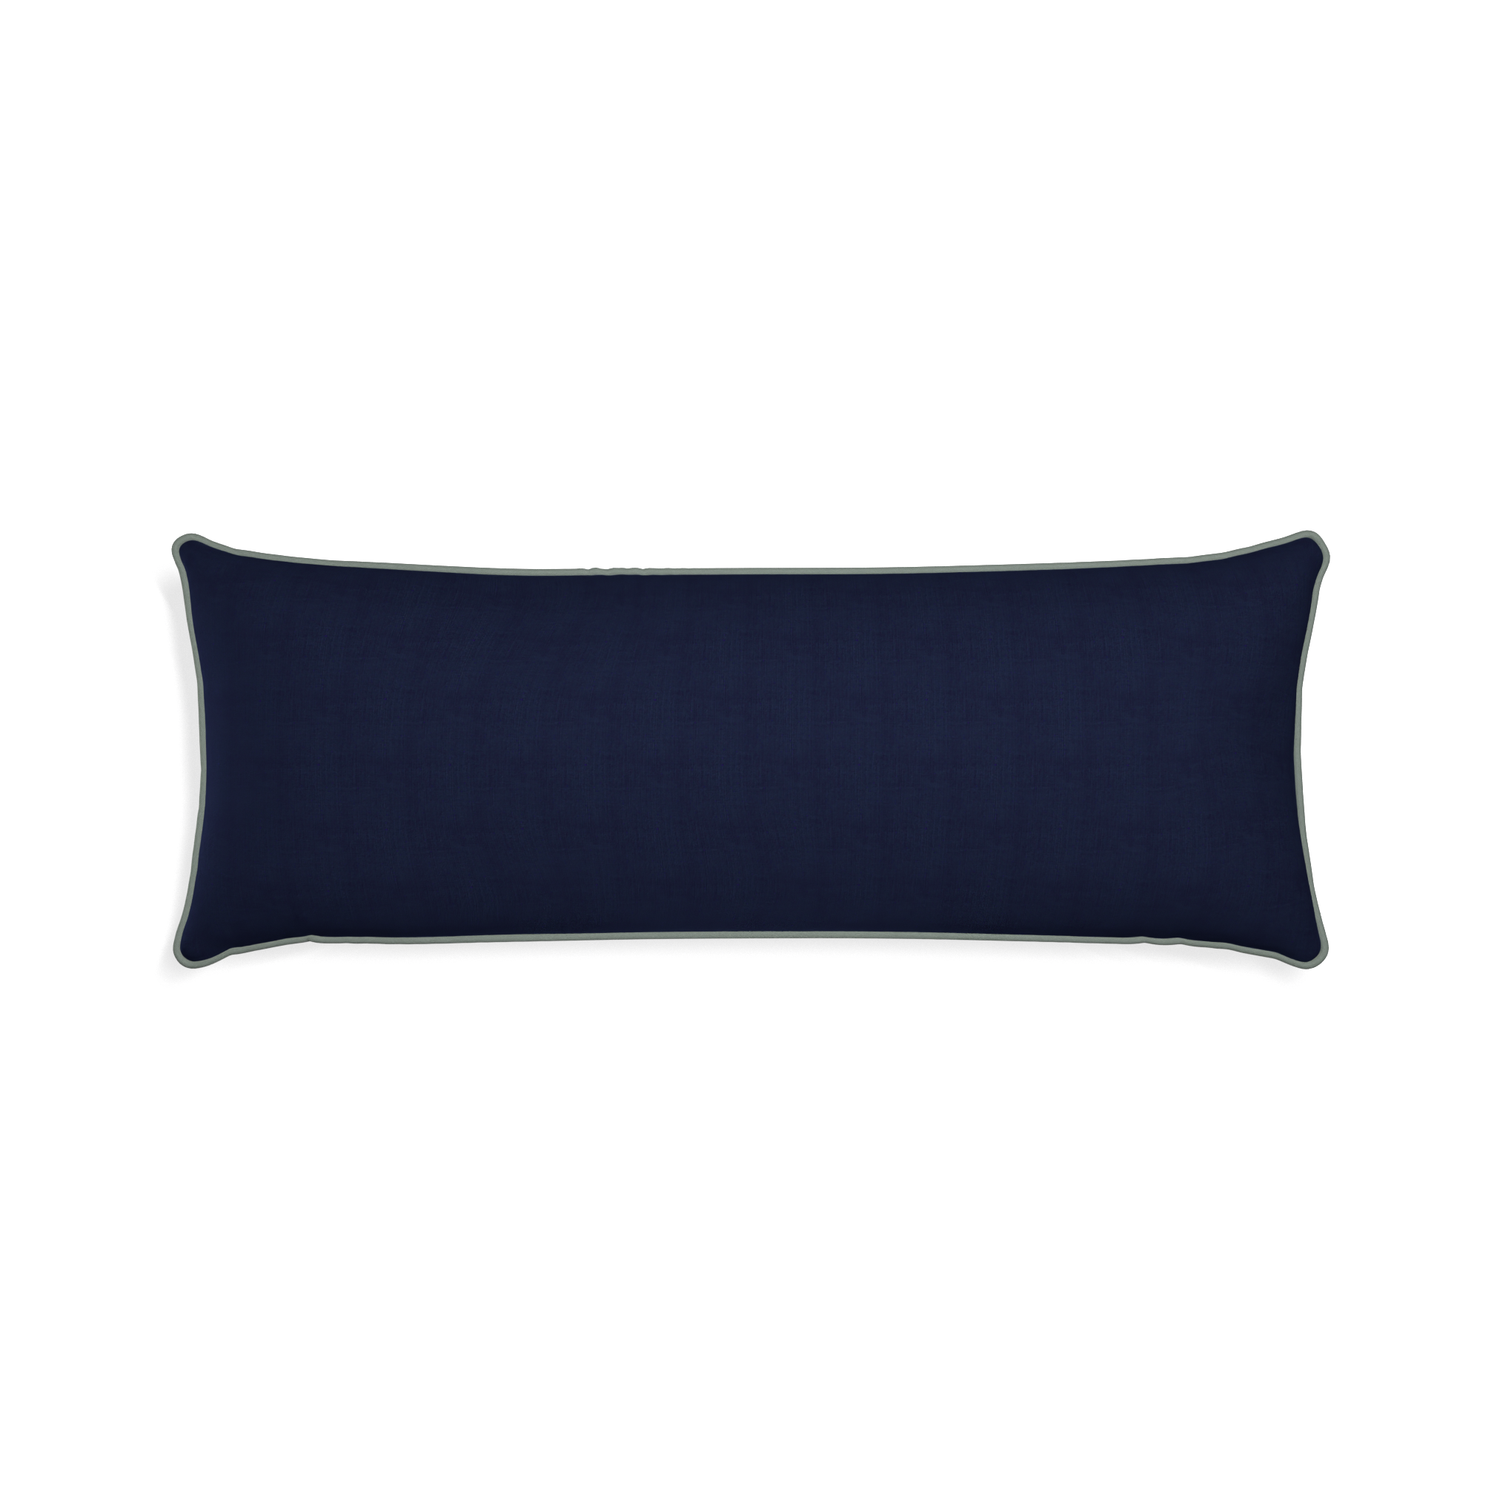 Xl-lumbar midnight custom navy bluepillow with sage piping on white background